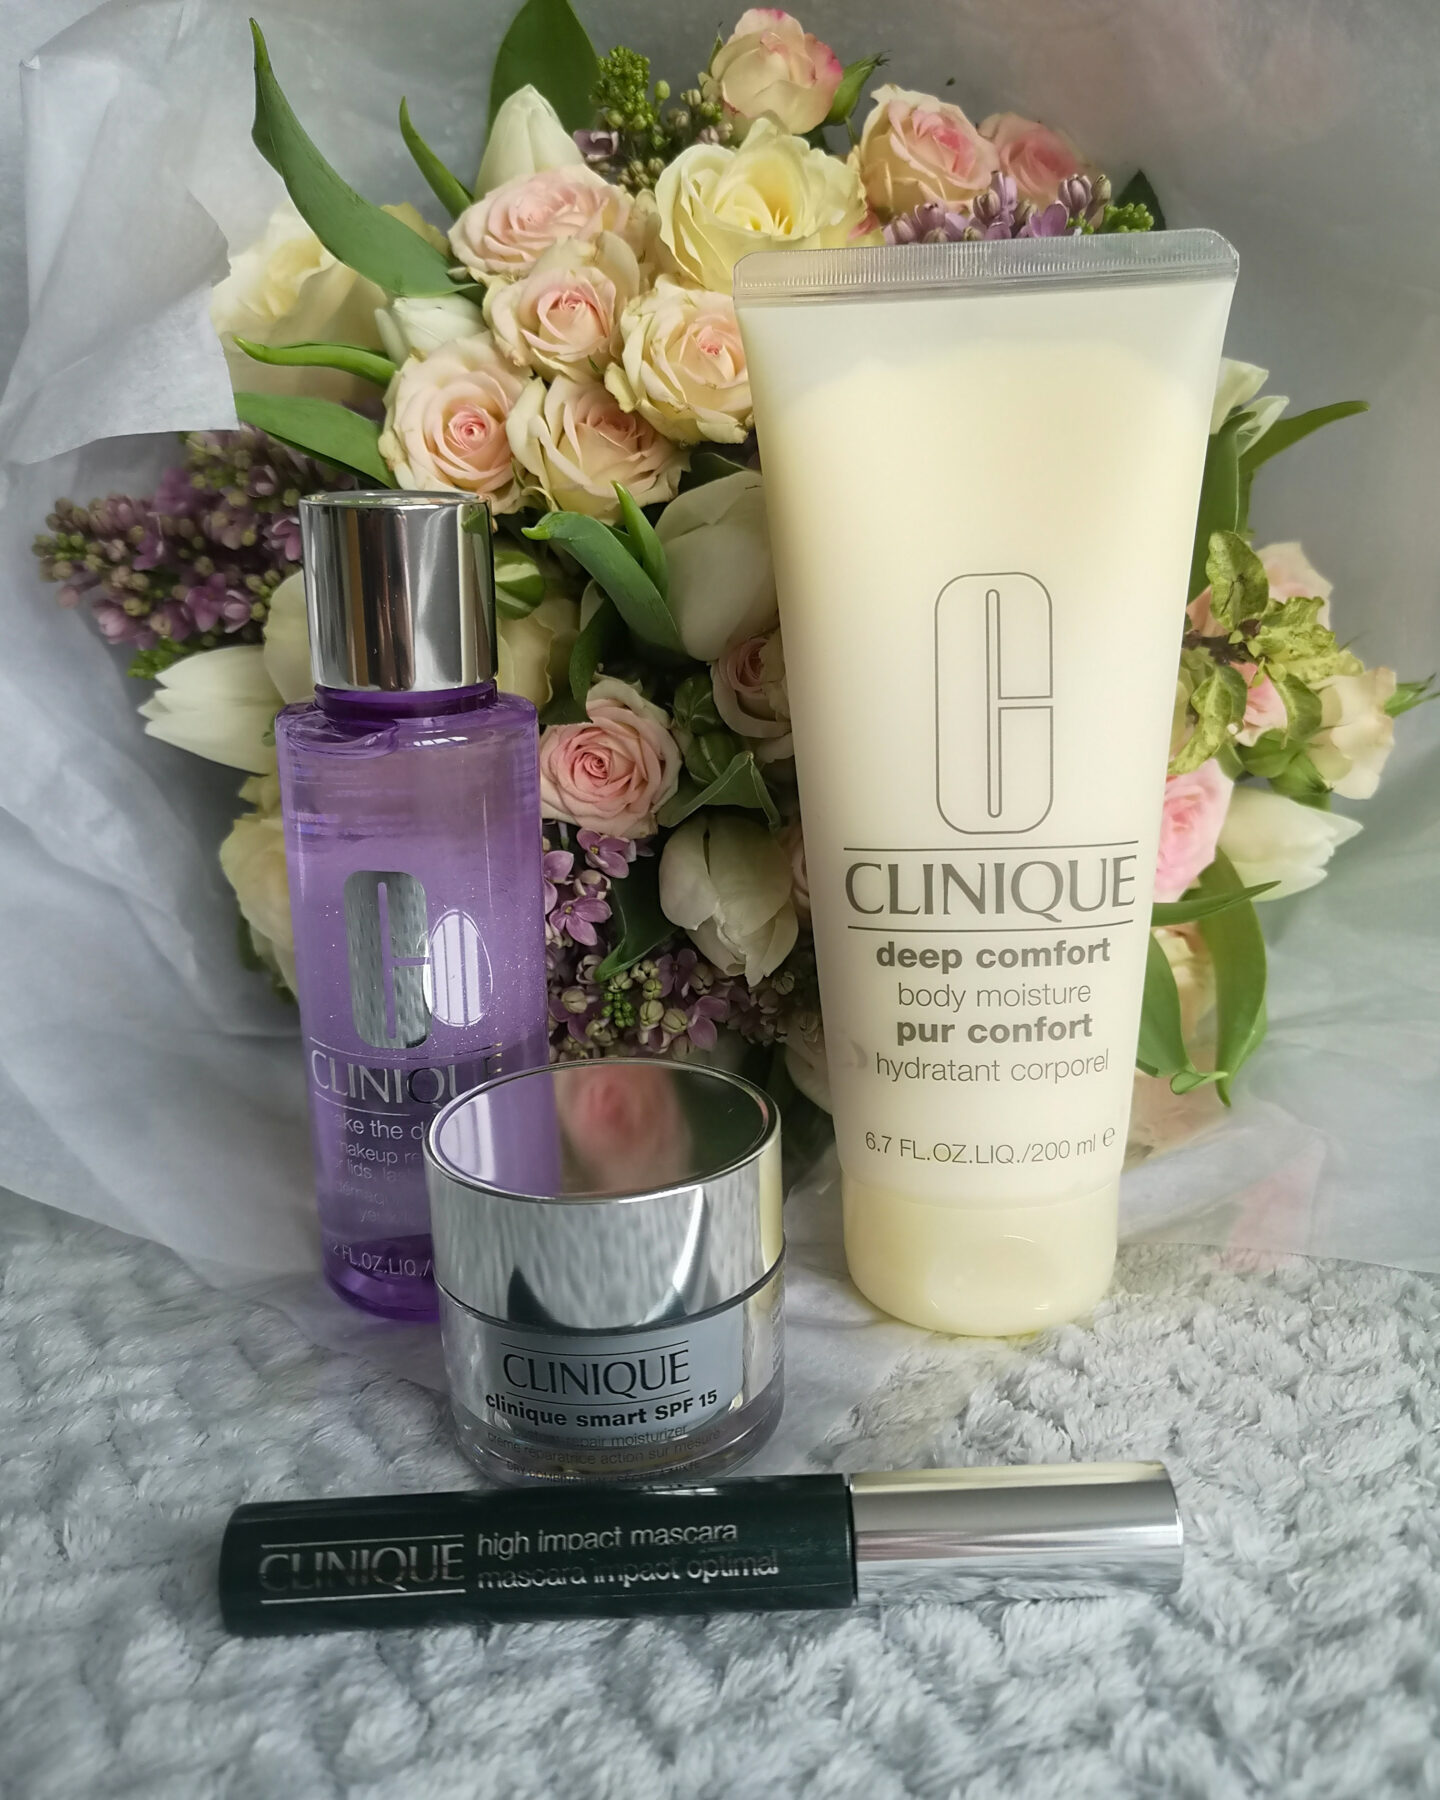 Love For All Mums With Boots, Boots, Mother's Day, Mother's Day 2023, Beauty Products, Beauty Selection, Clinique, Champneys Spa, Max Factor, Lipstick, Gift Set, Mother Figure, Pampering Time, Mother's Day Selection